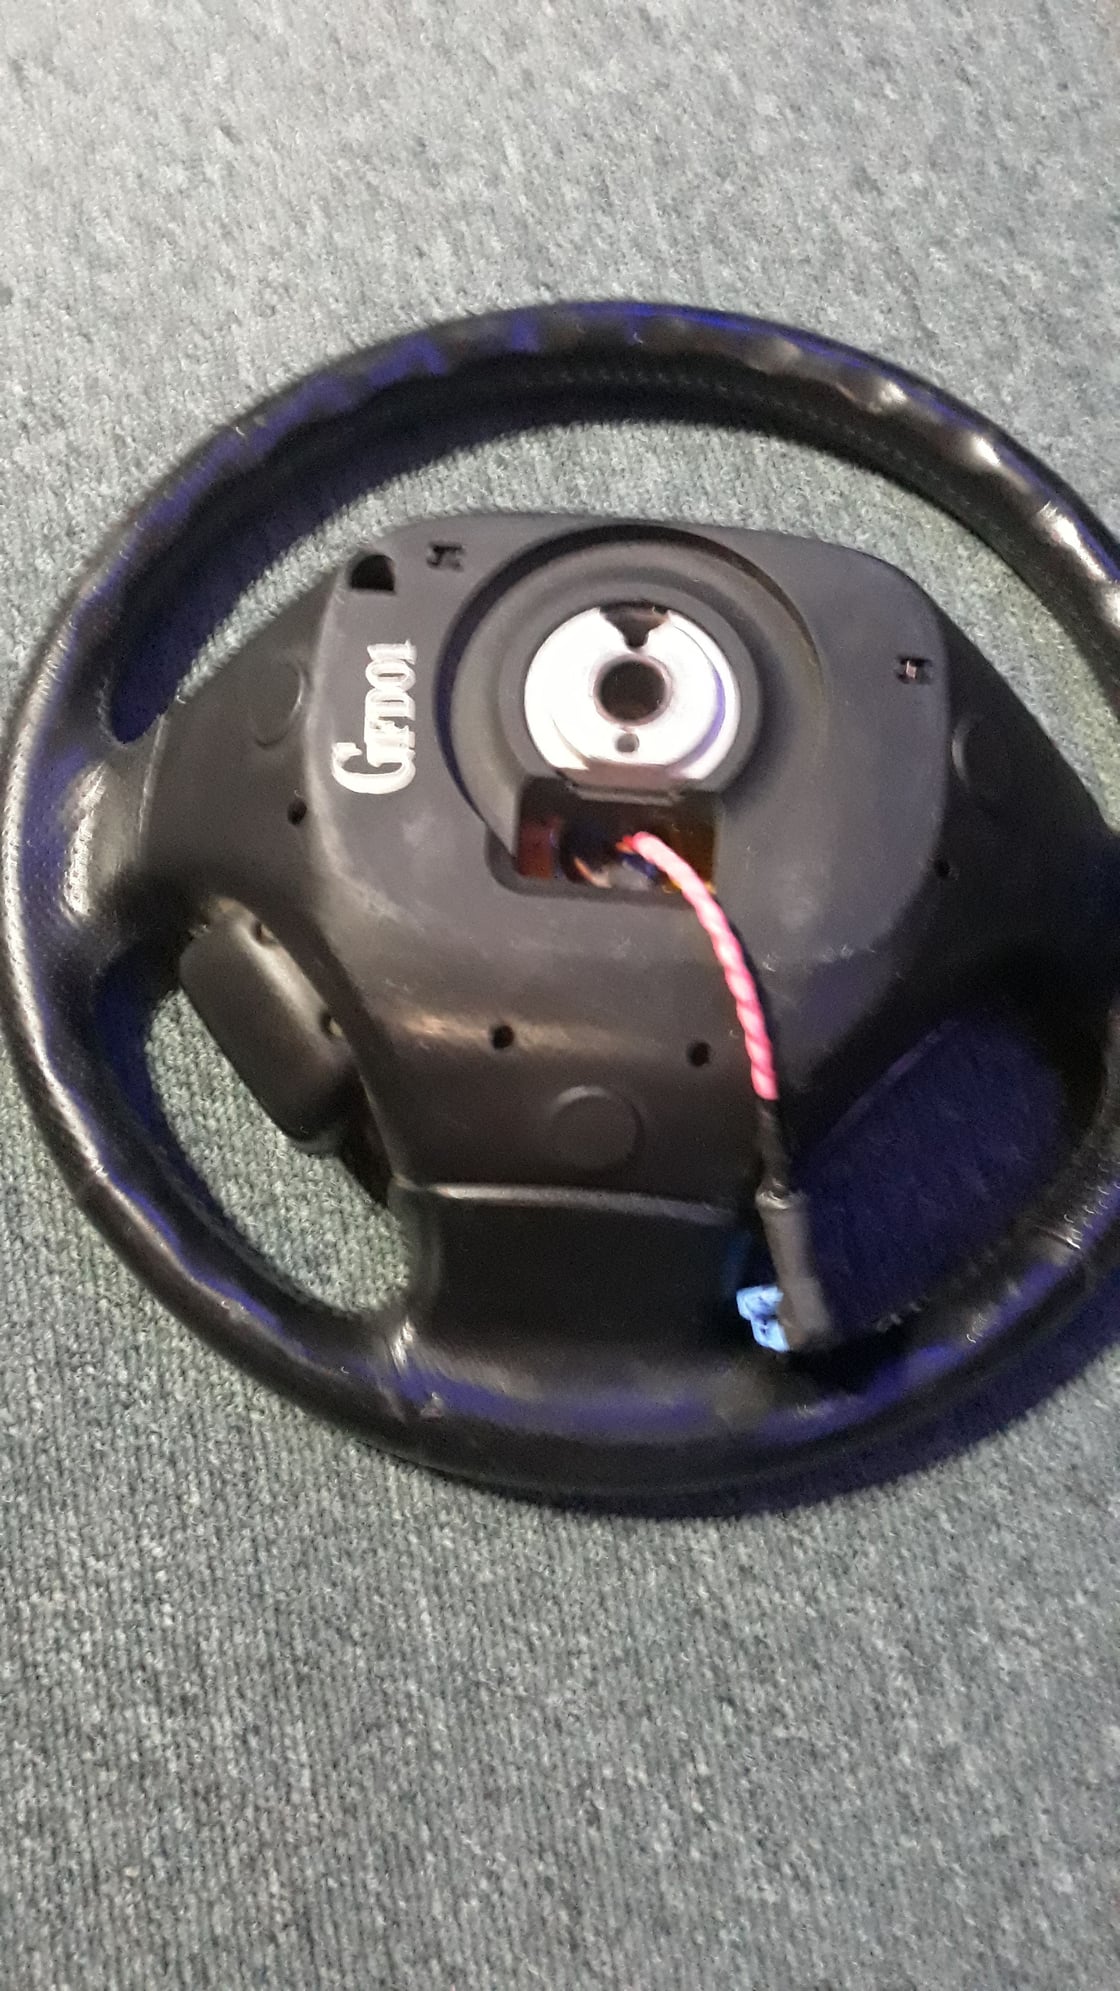 Interior/Upholstery - OEM Steering wheel with airbag and controls - Used - Orlando, FL 32824, United States